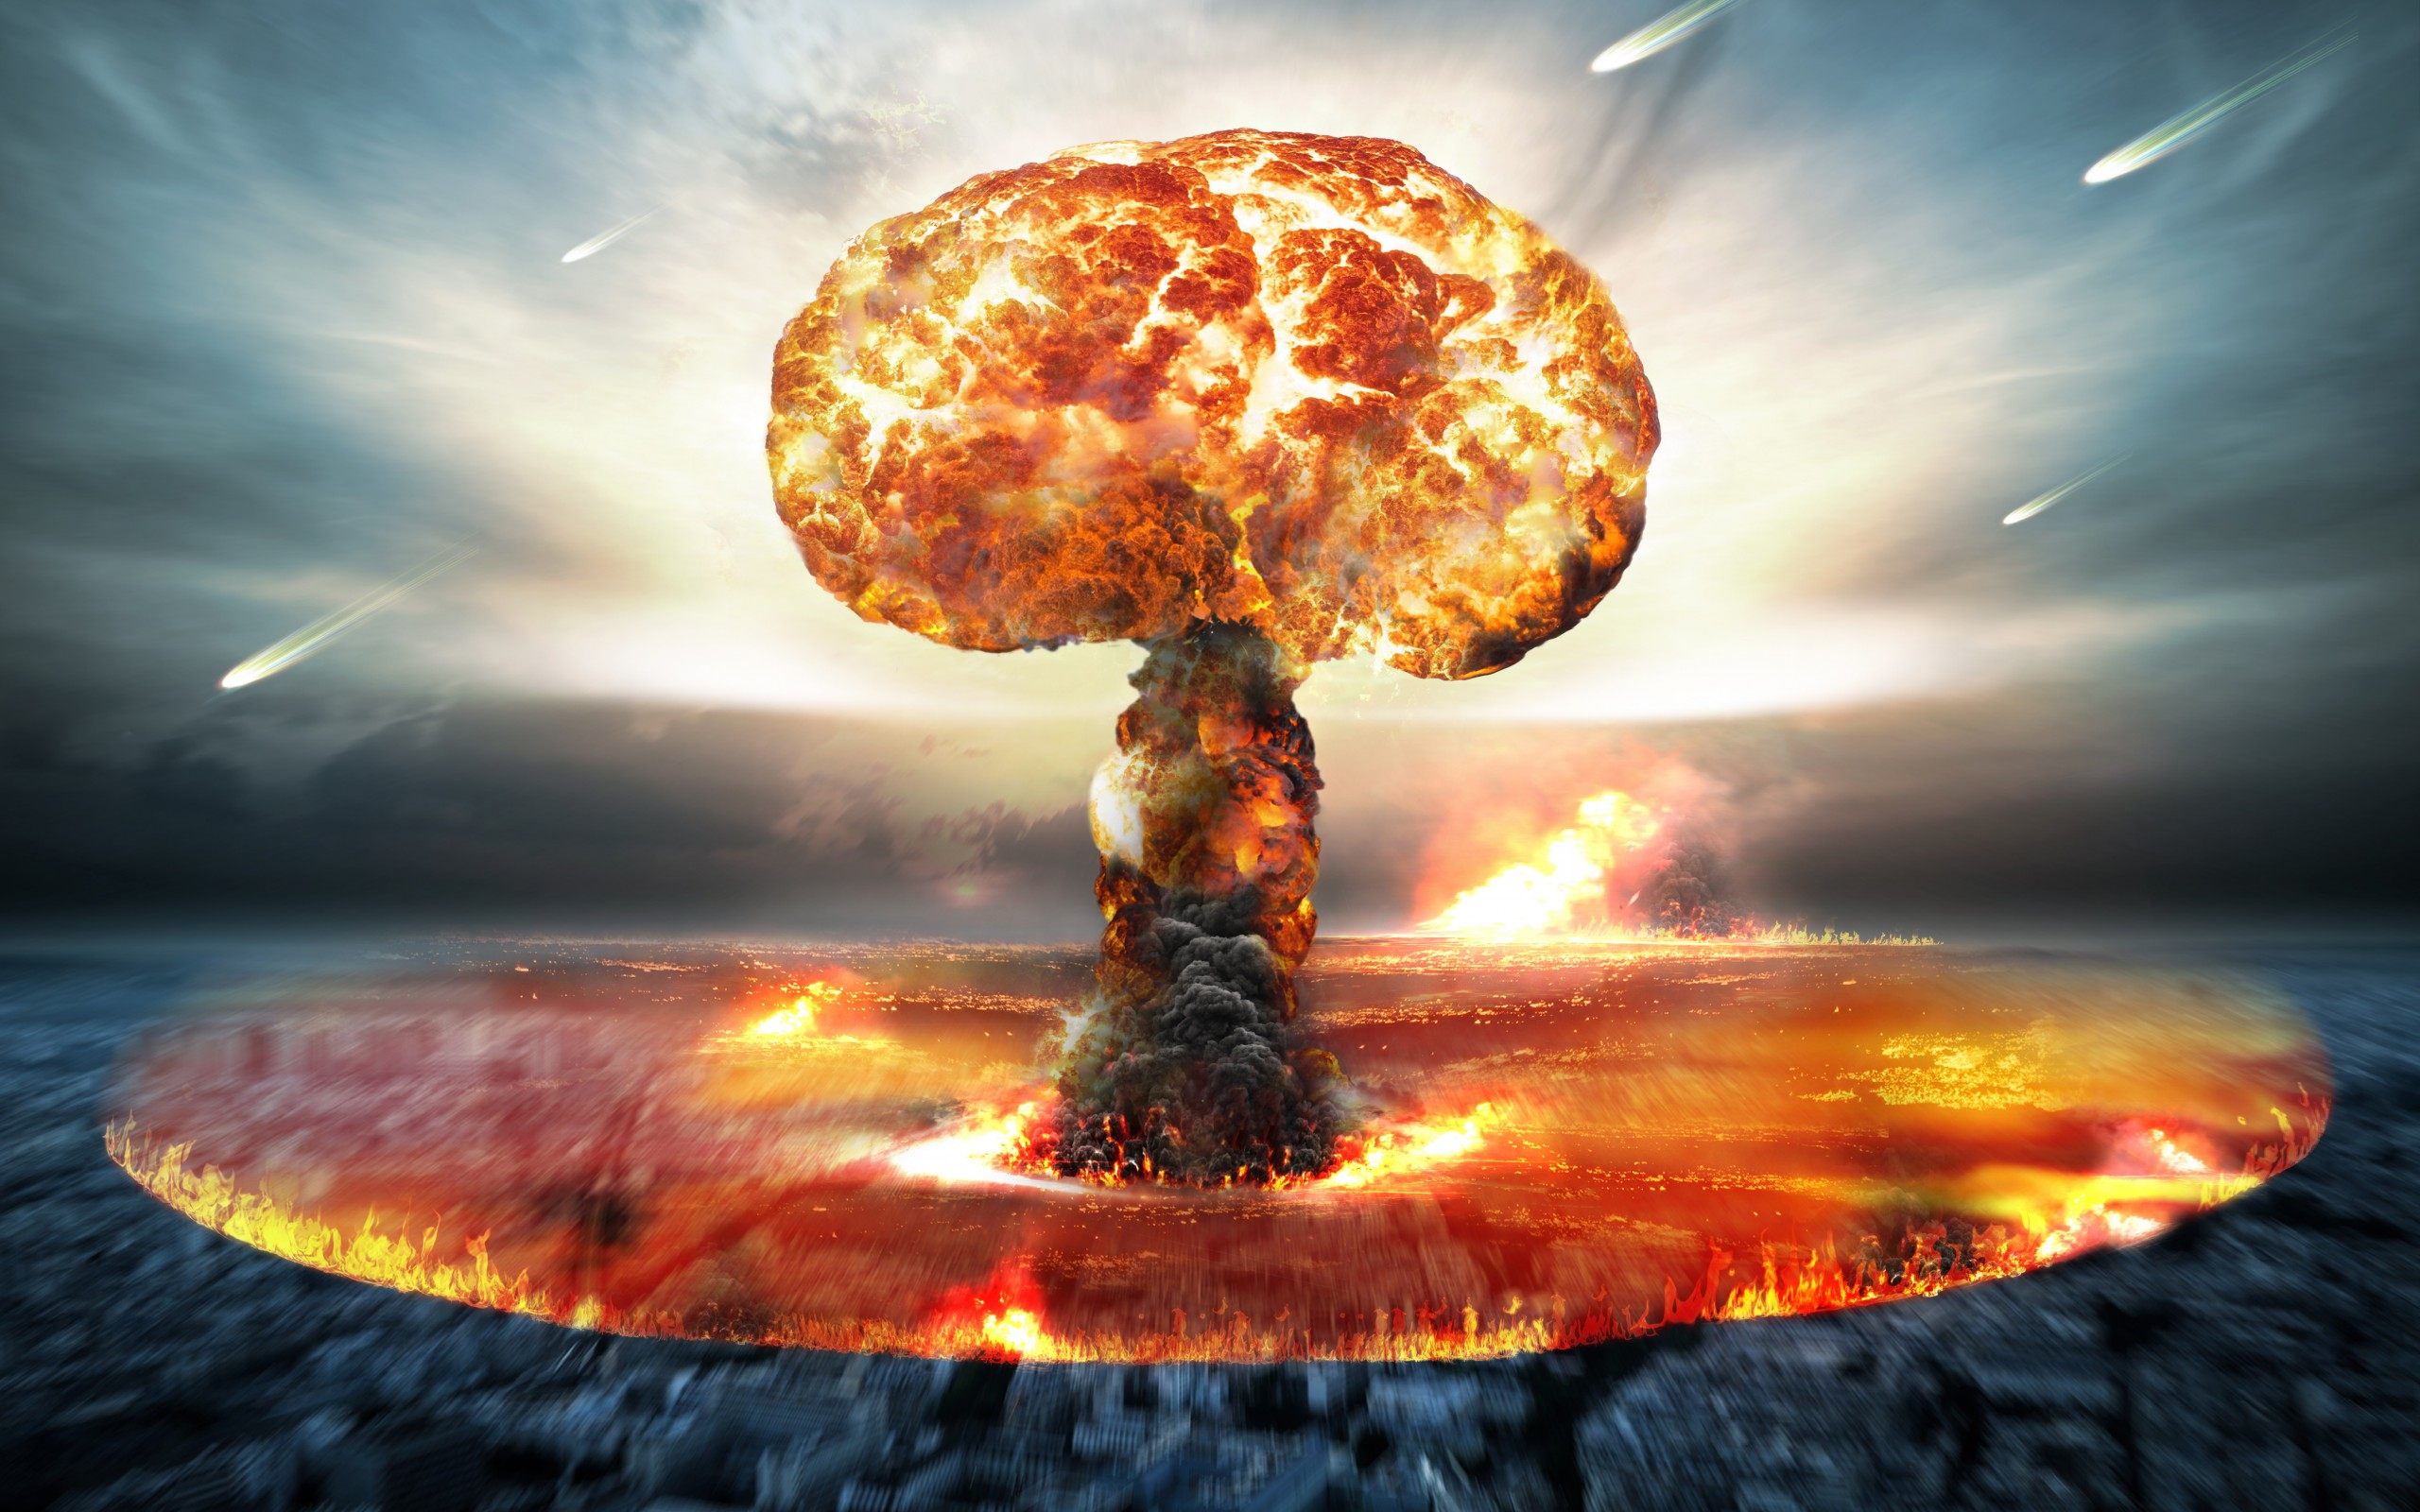 Nuclear Explosion Wallpaper For Desktop Of Bomb Explosion